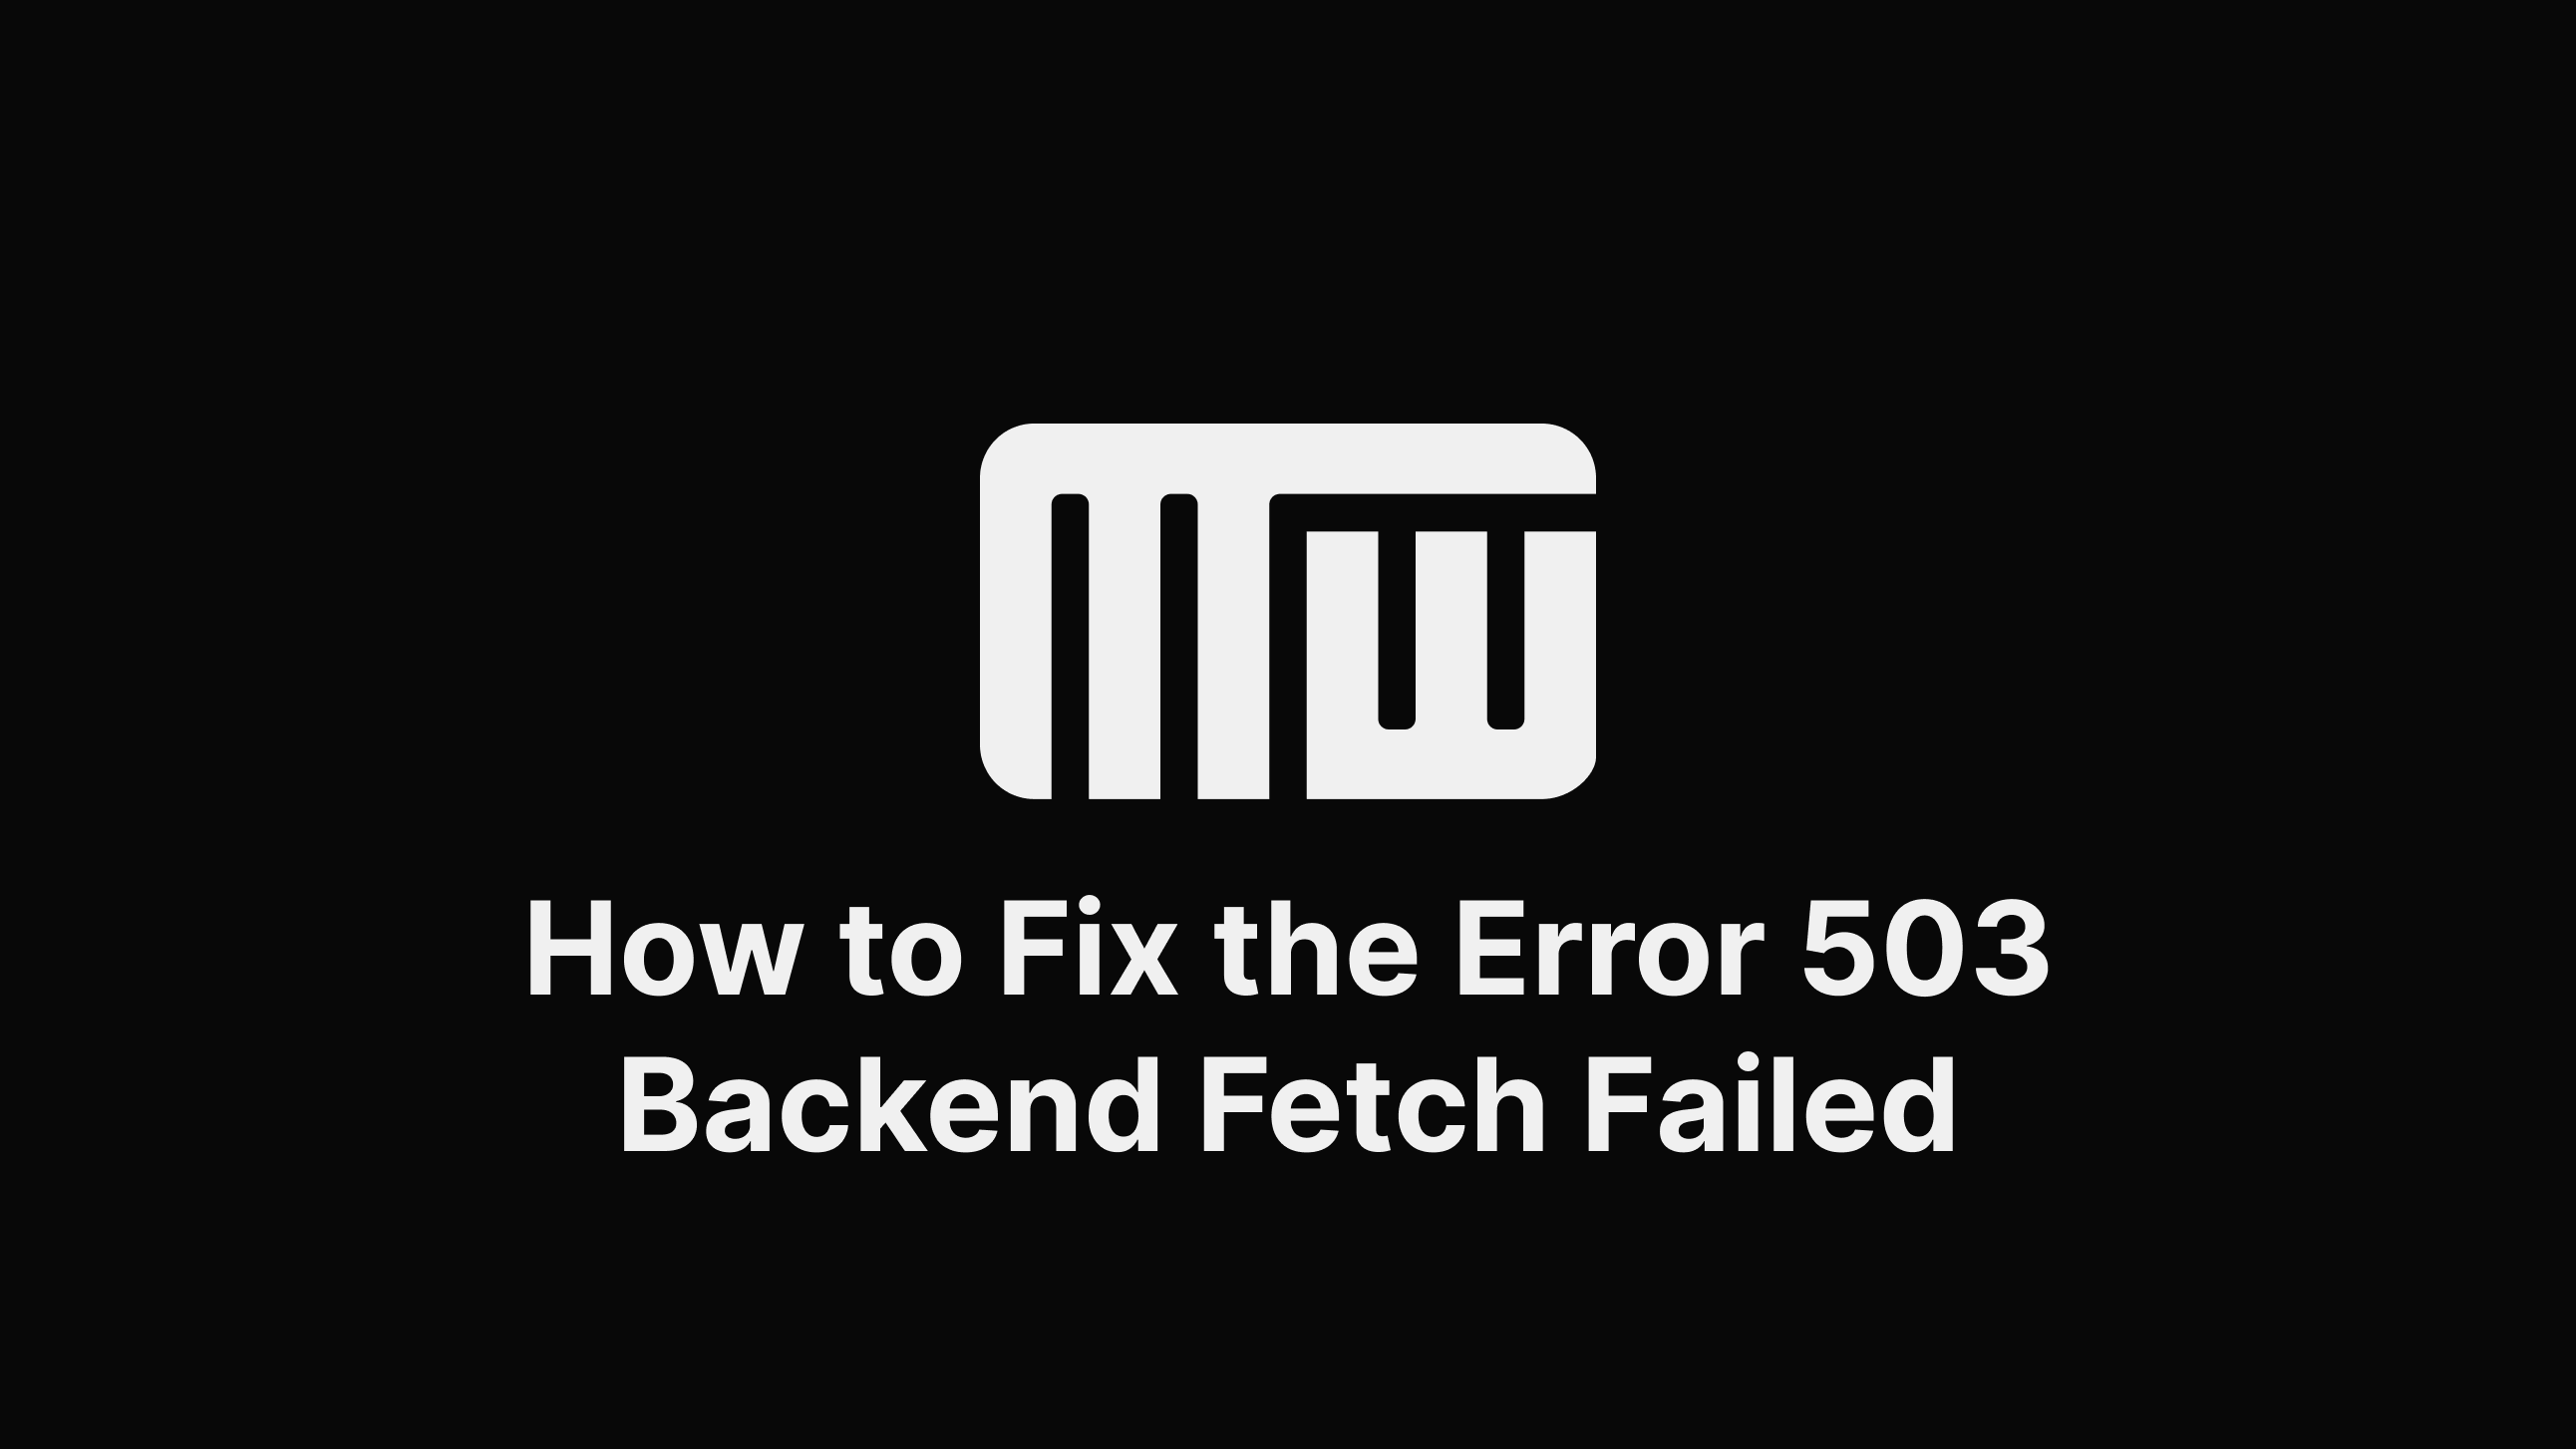 How To Fix The Error 503 Backend Fetch Failed